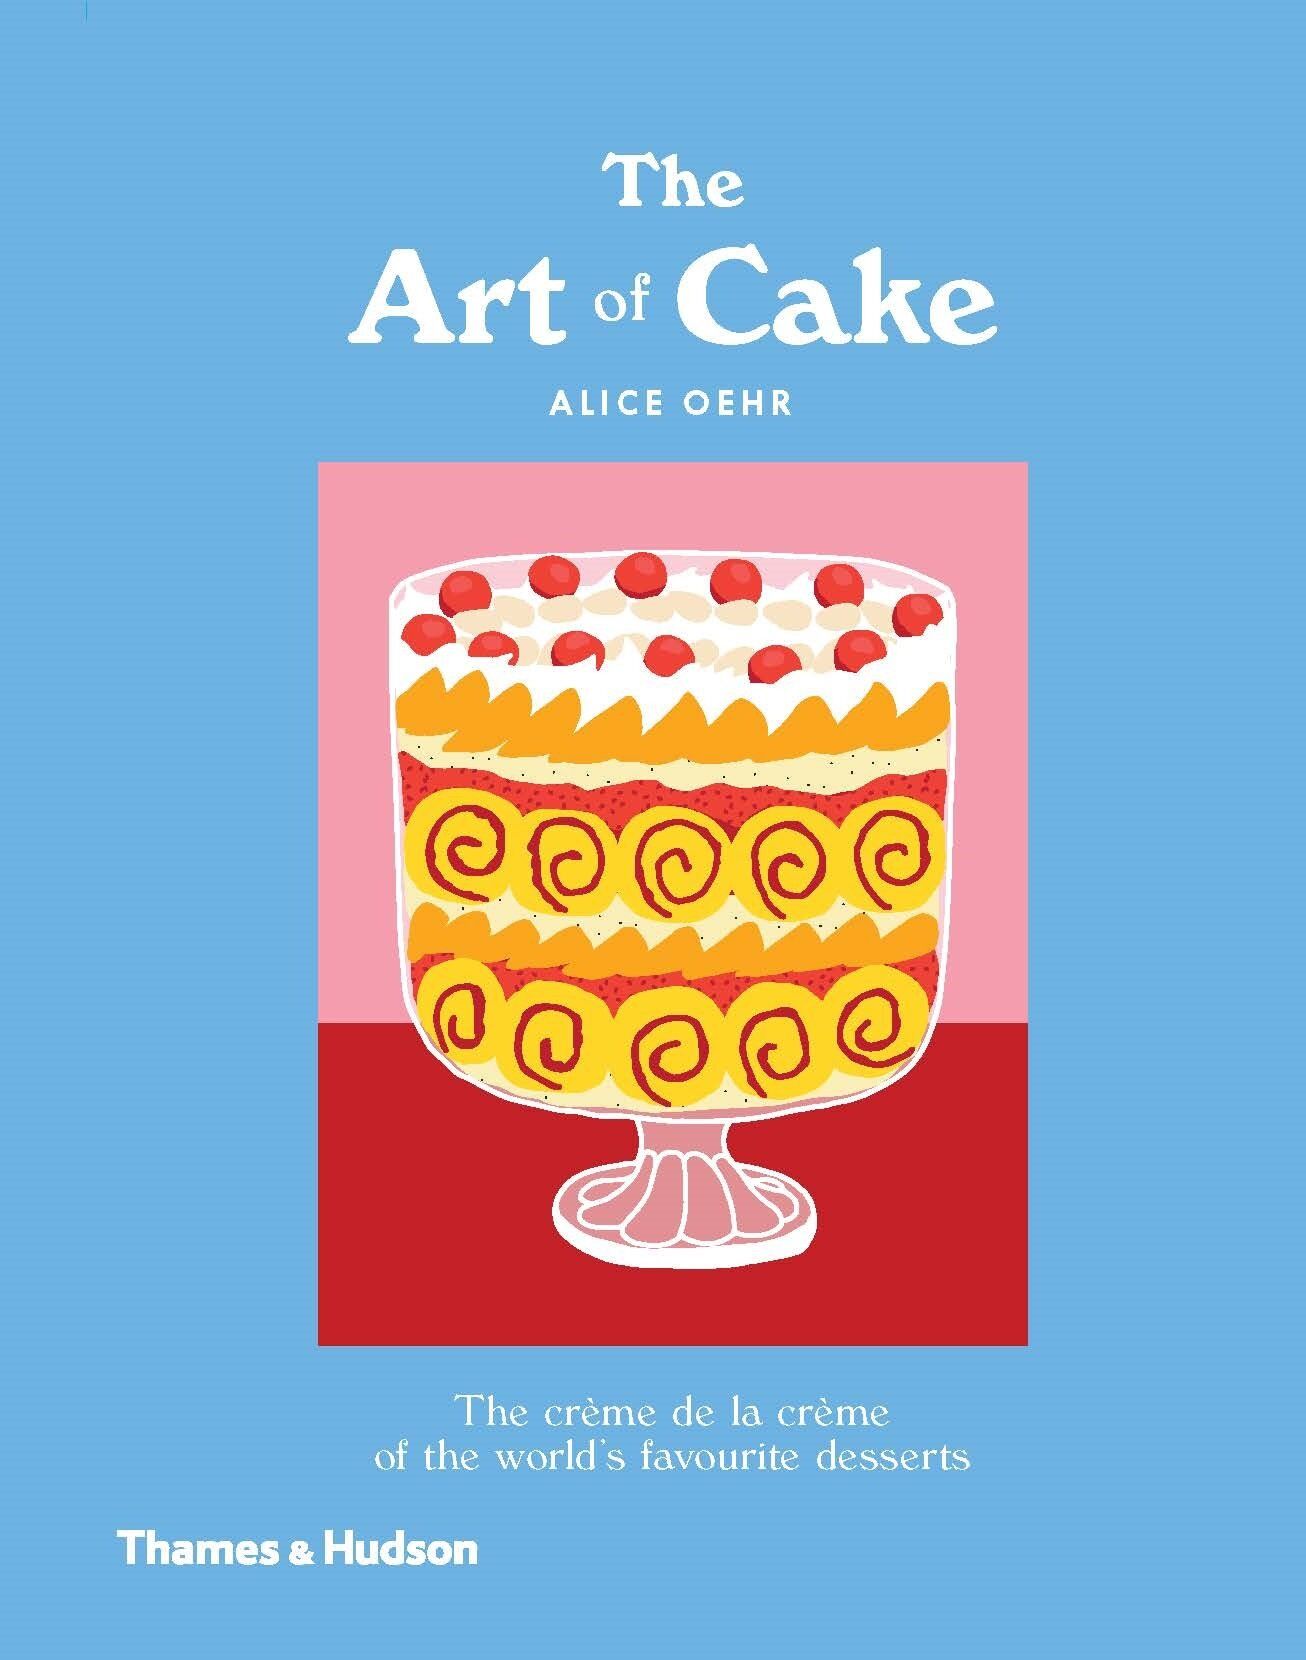 Book: The Art of Cake